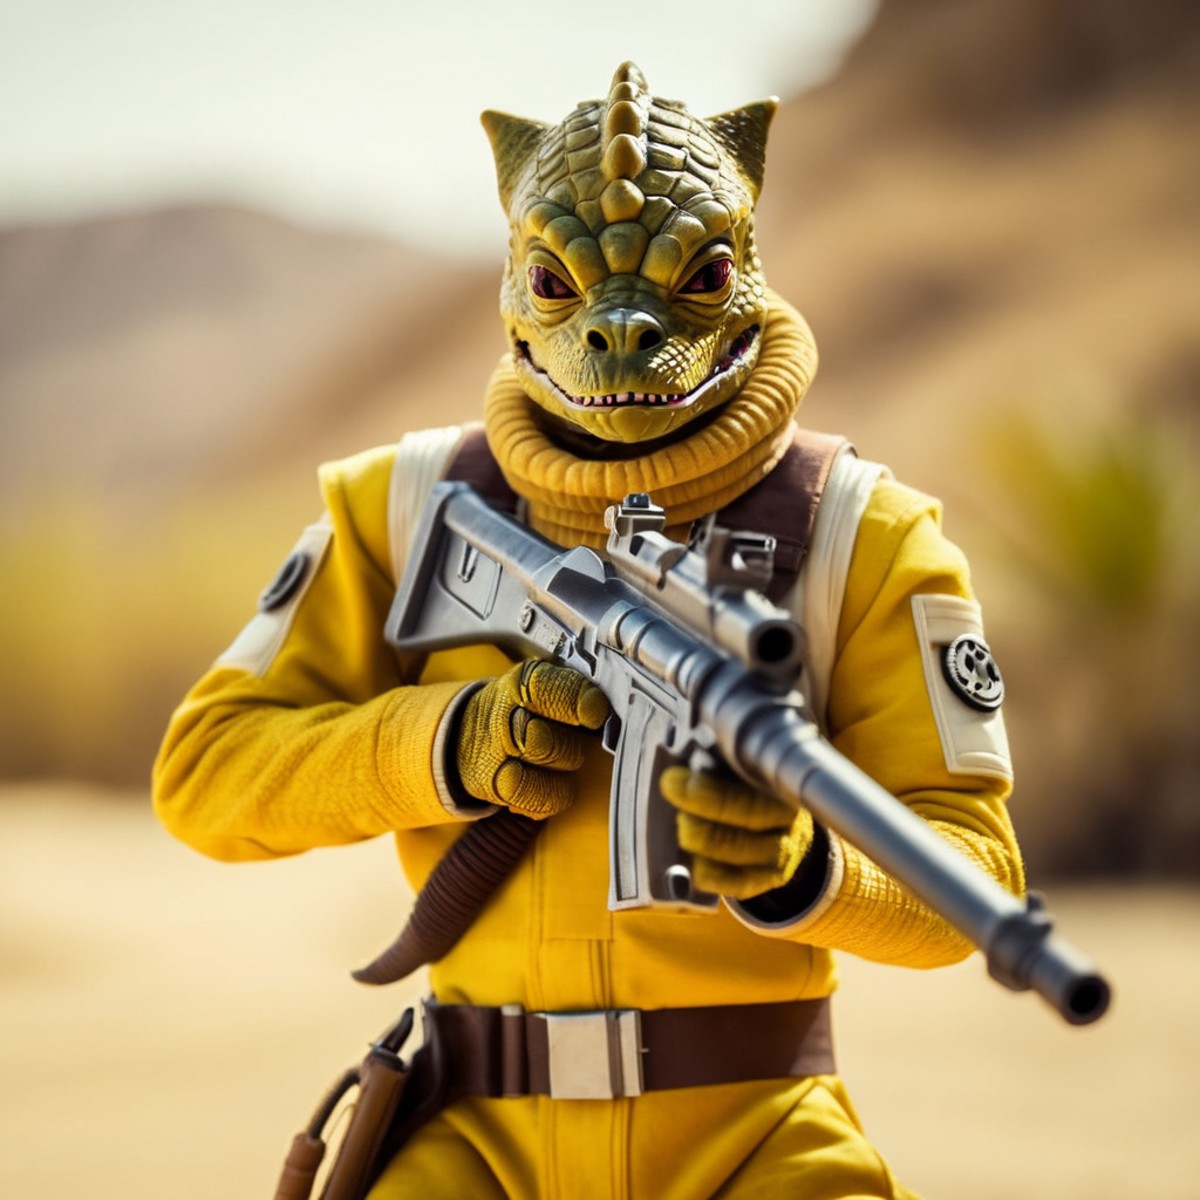 cinematic film still of  <lora:Bossk:1.2>
Bossk a reptilian creature in a yellow outfit holding a gun in star wars univers...